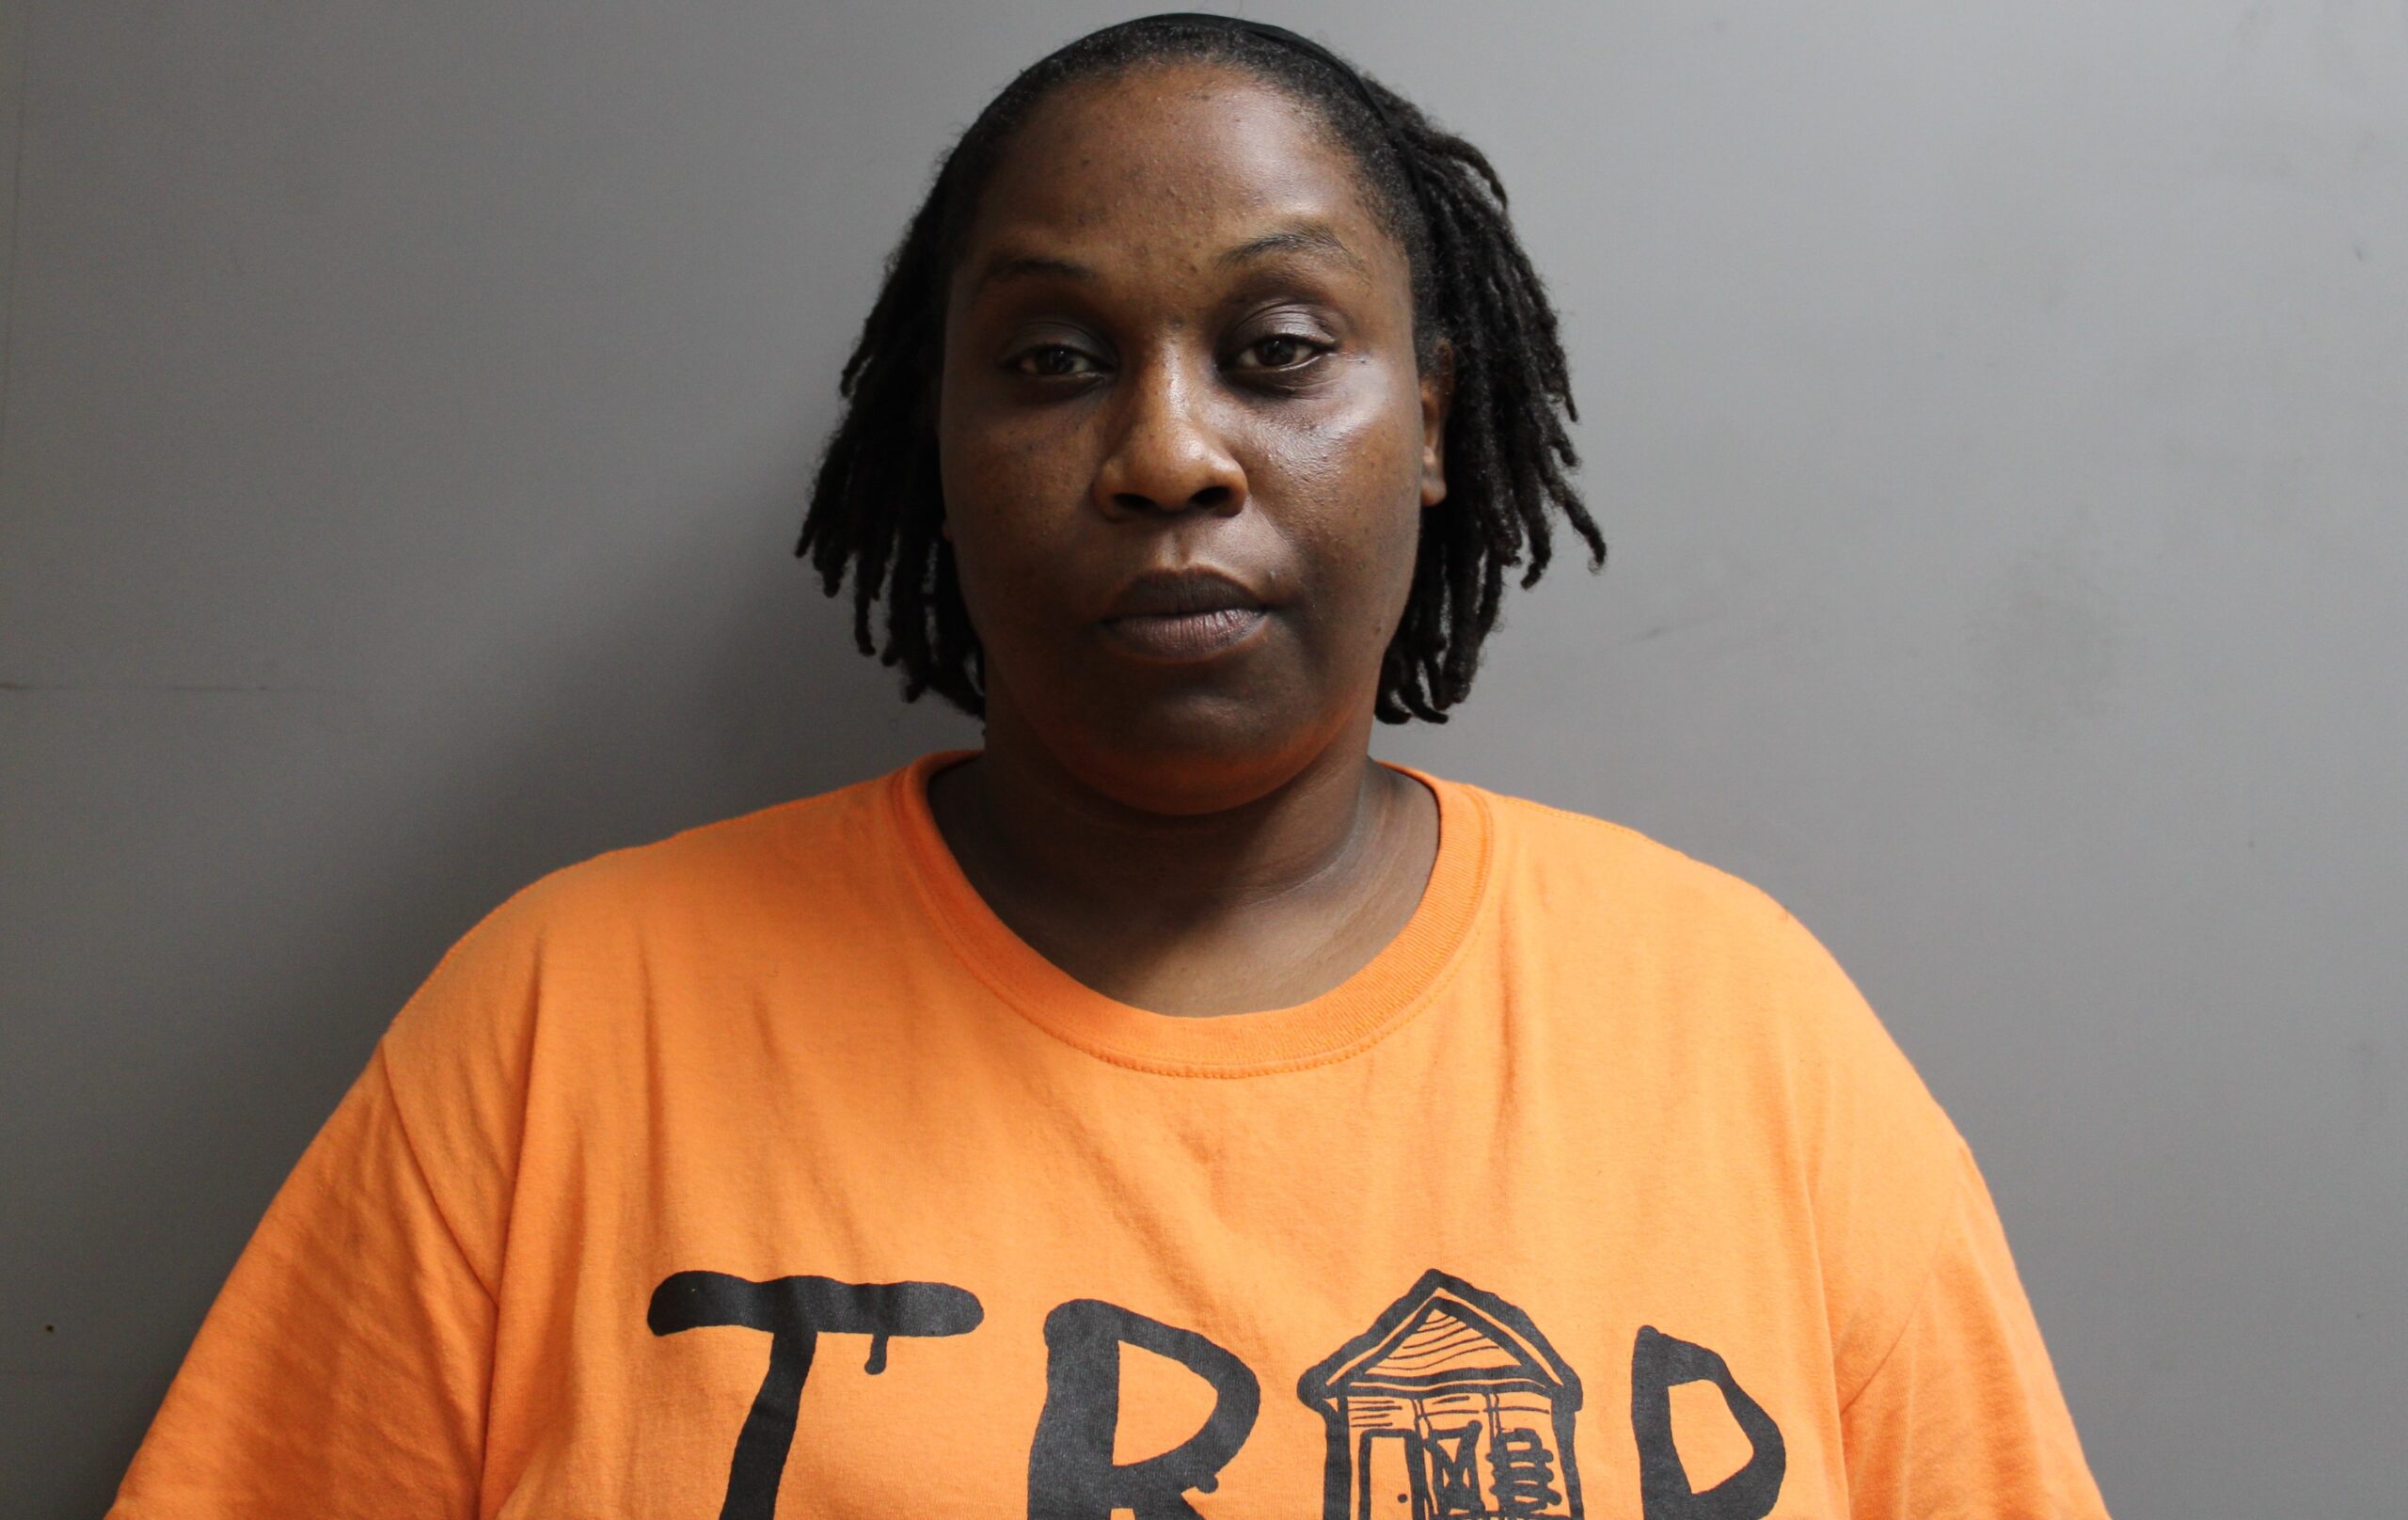 Grove Place Woman Allegedly Attacks Male Relative During Heated Argument